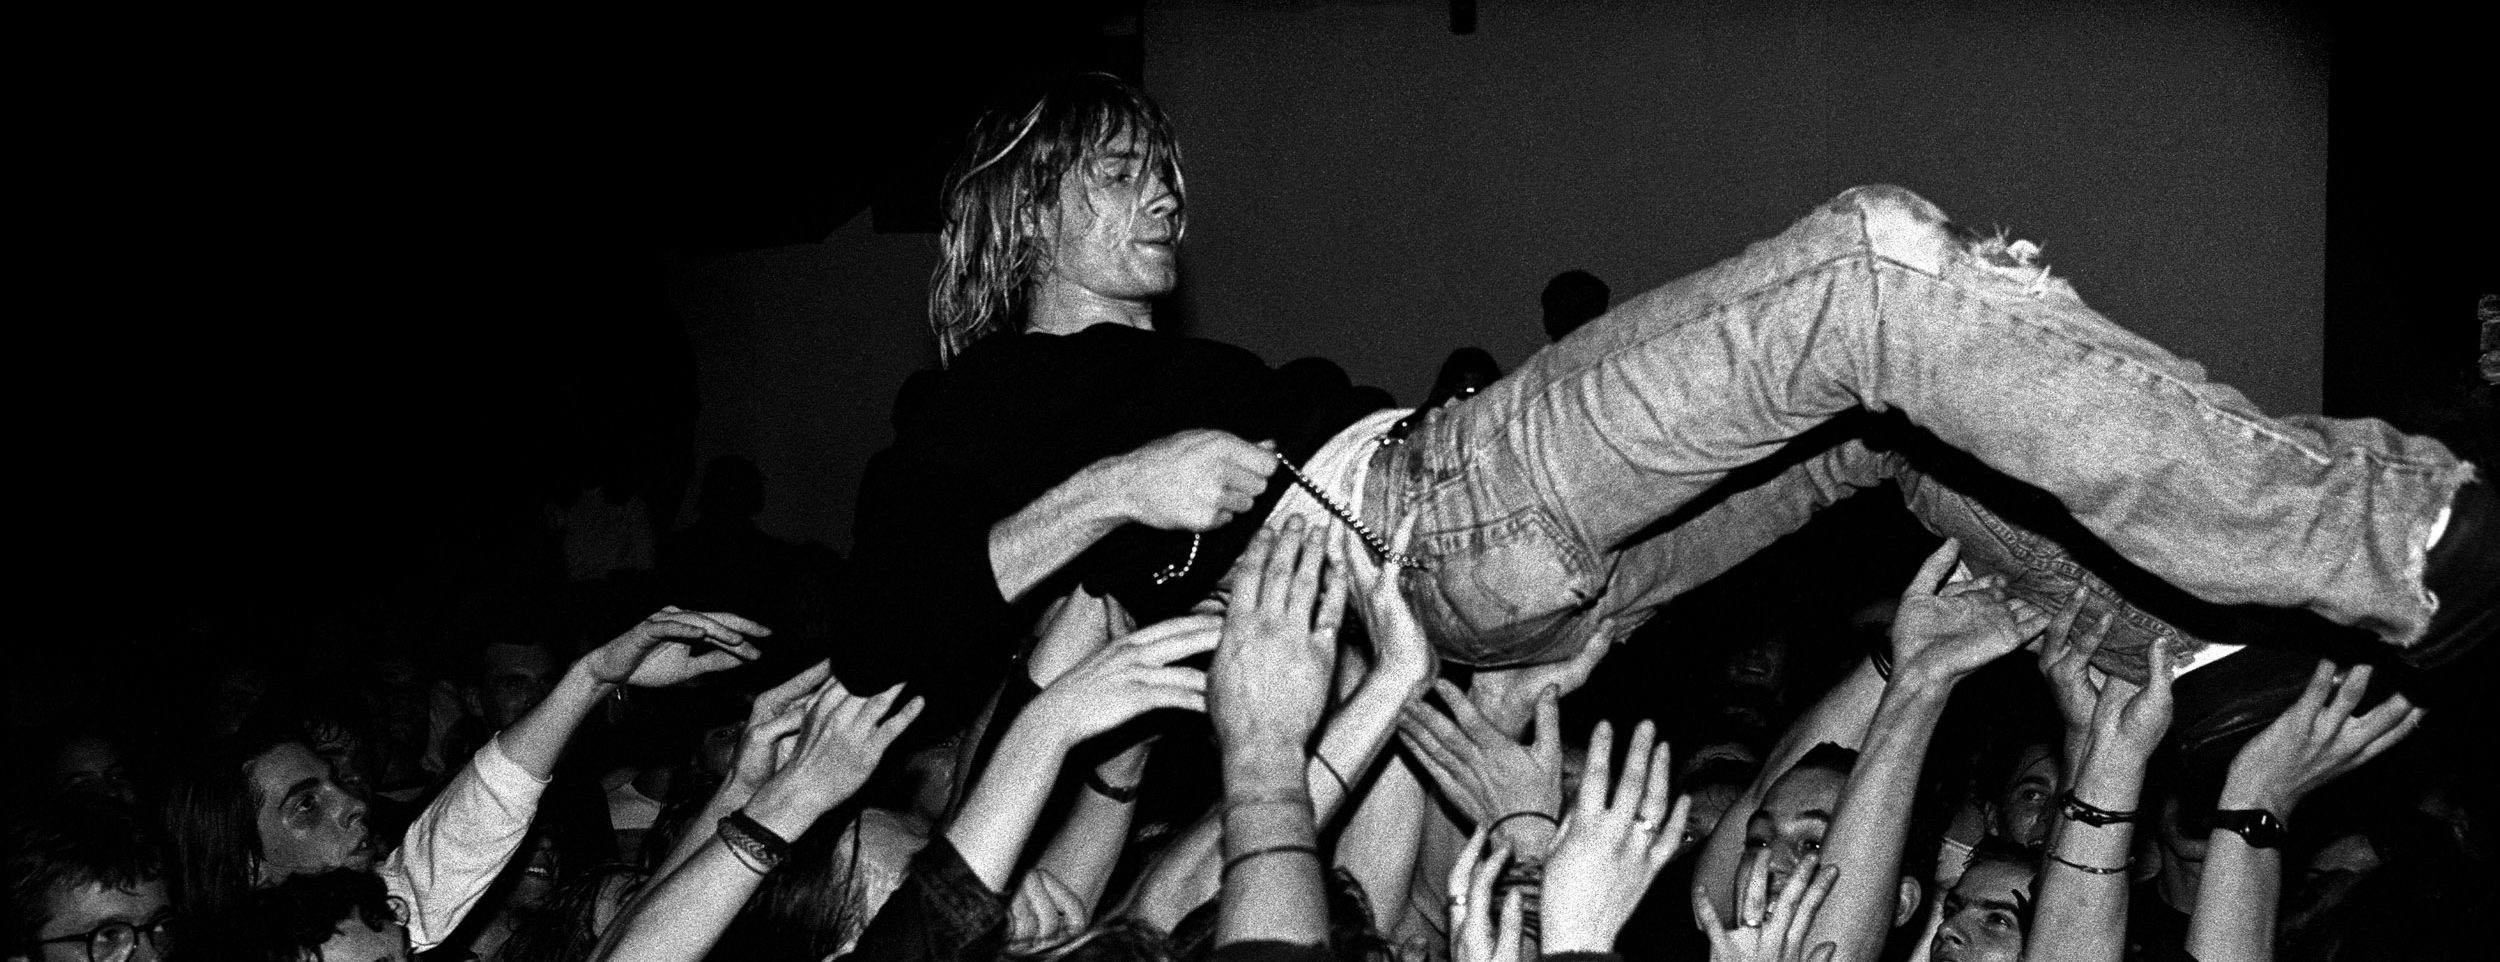 Kurt Cobain’s Manager Reveals Intimate Side of Nirvana Frontman on 25th Anniversary of Death